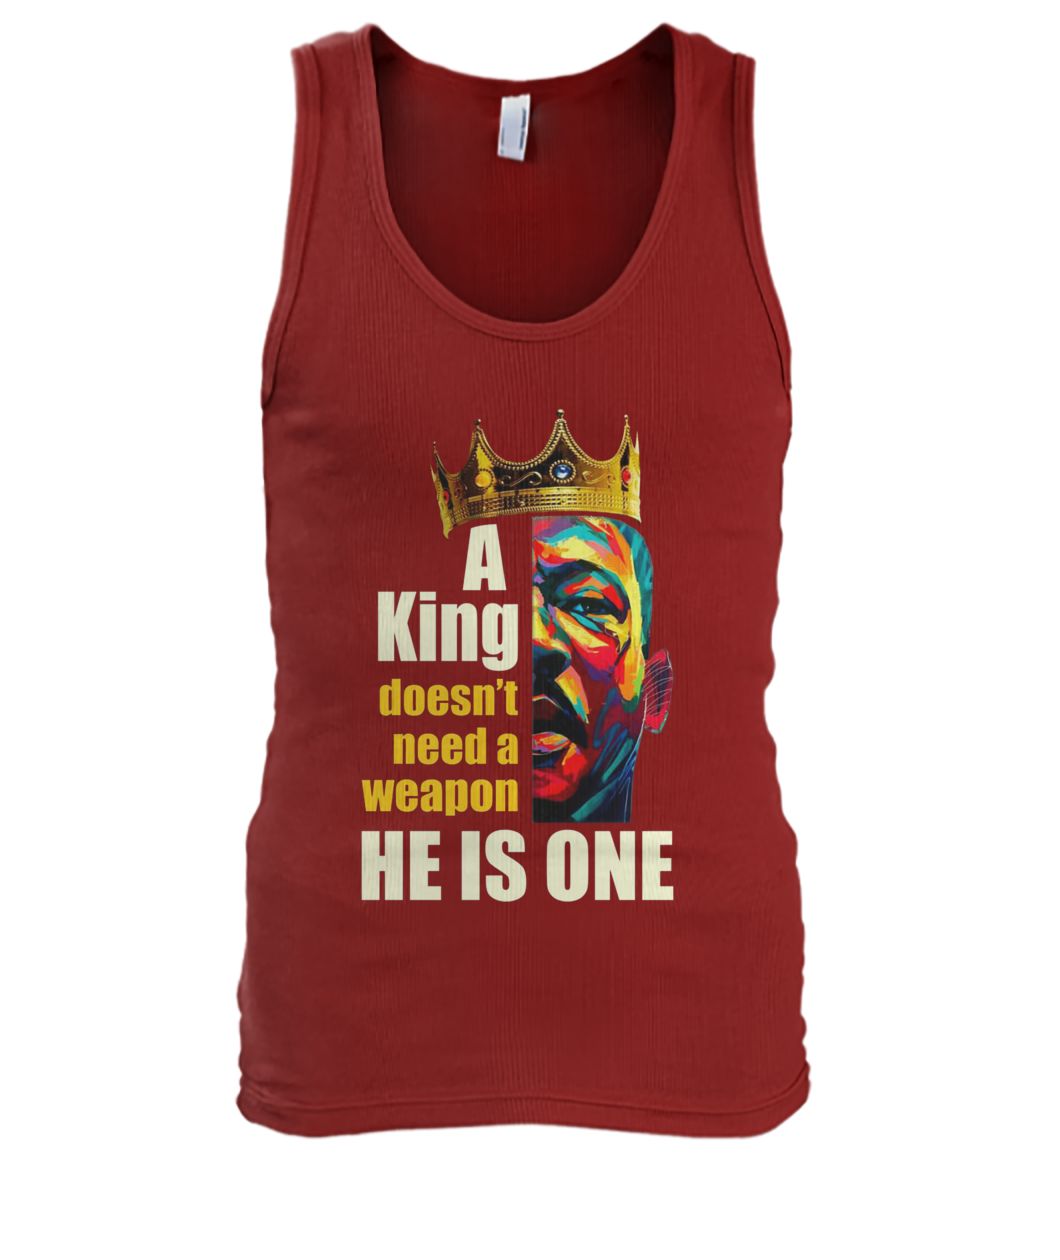 Martin luther king a king doesn't need a weapon he is one men's tank top